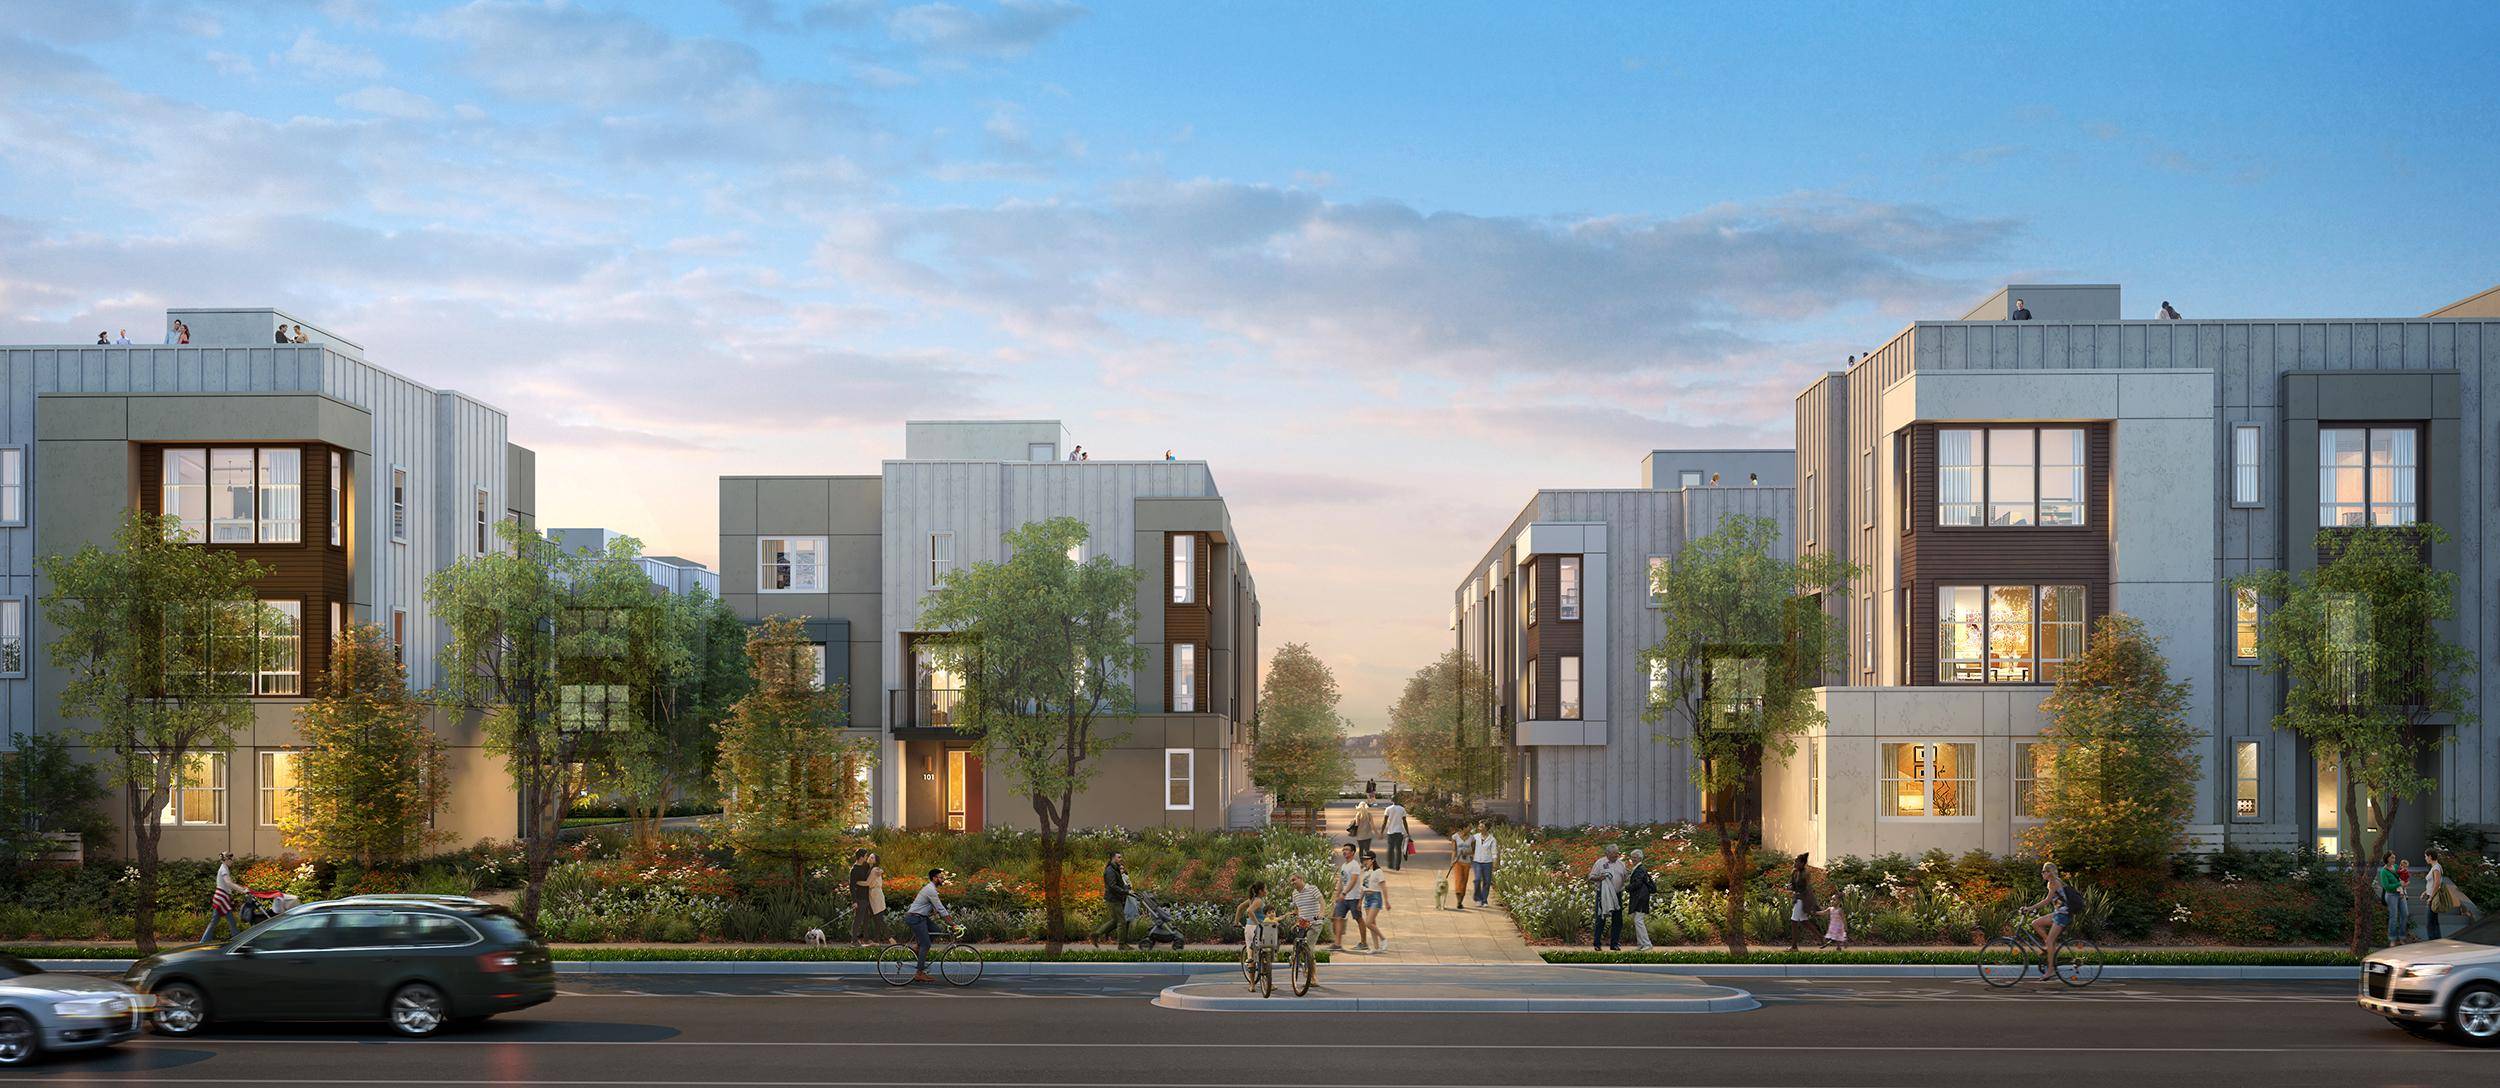 Architects, Modern Townhome Buildings in Los Angeles, KTGY, Architecture, Branding, Interiors